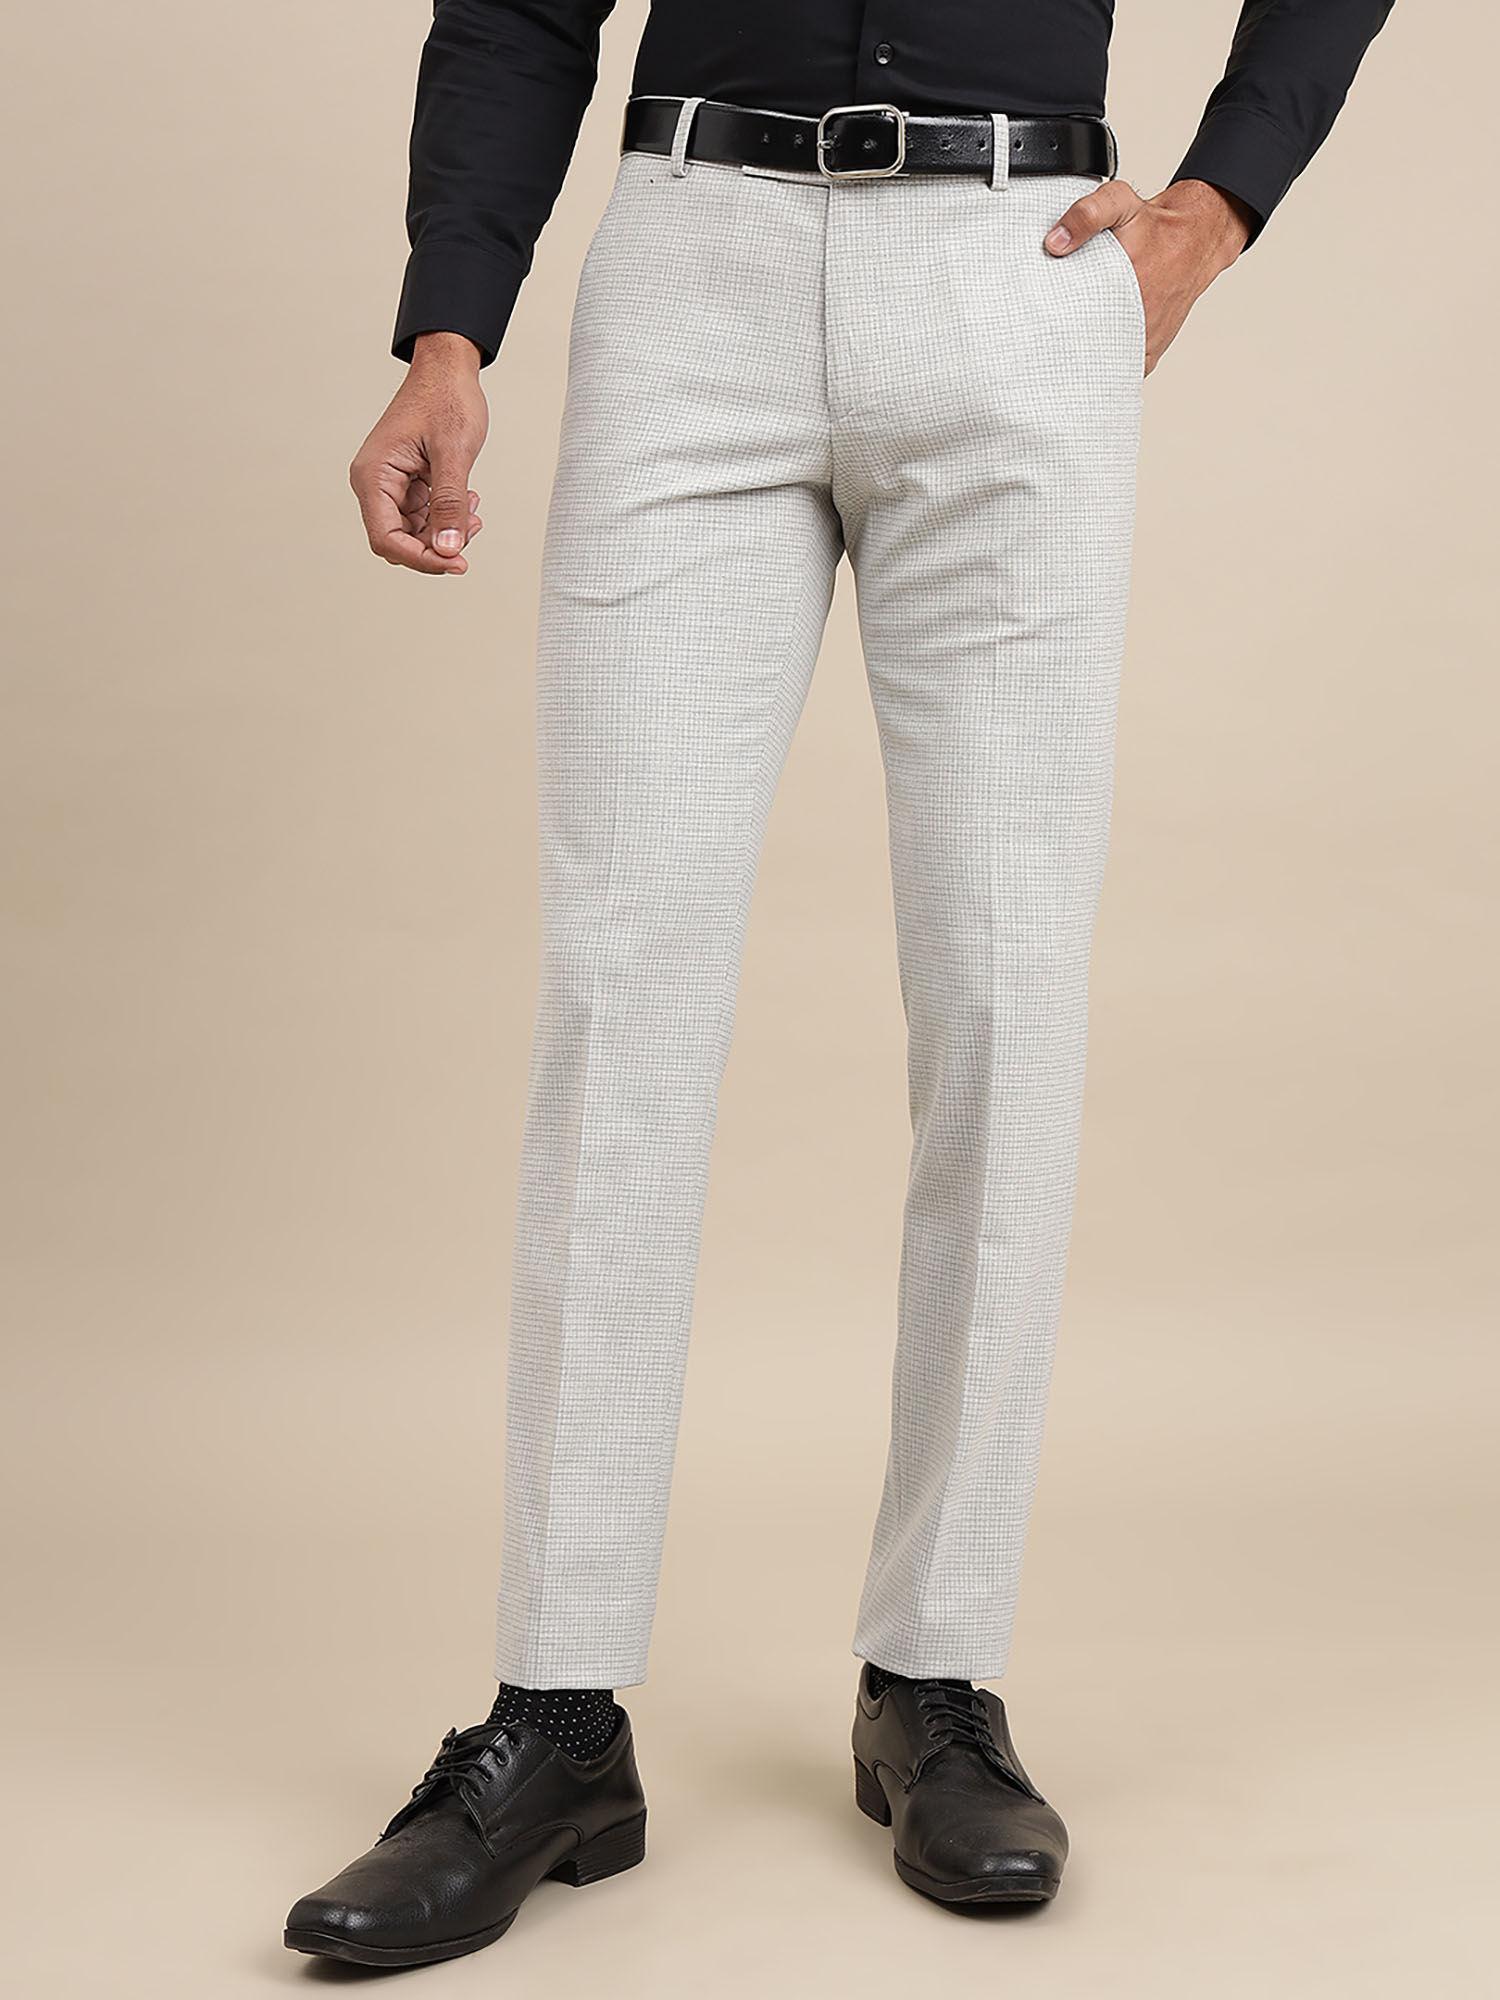 super slim fit checked formal trousers for men